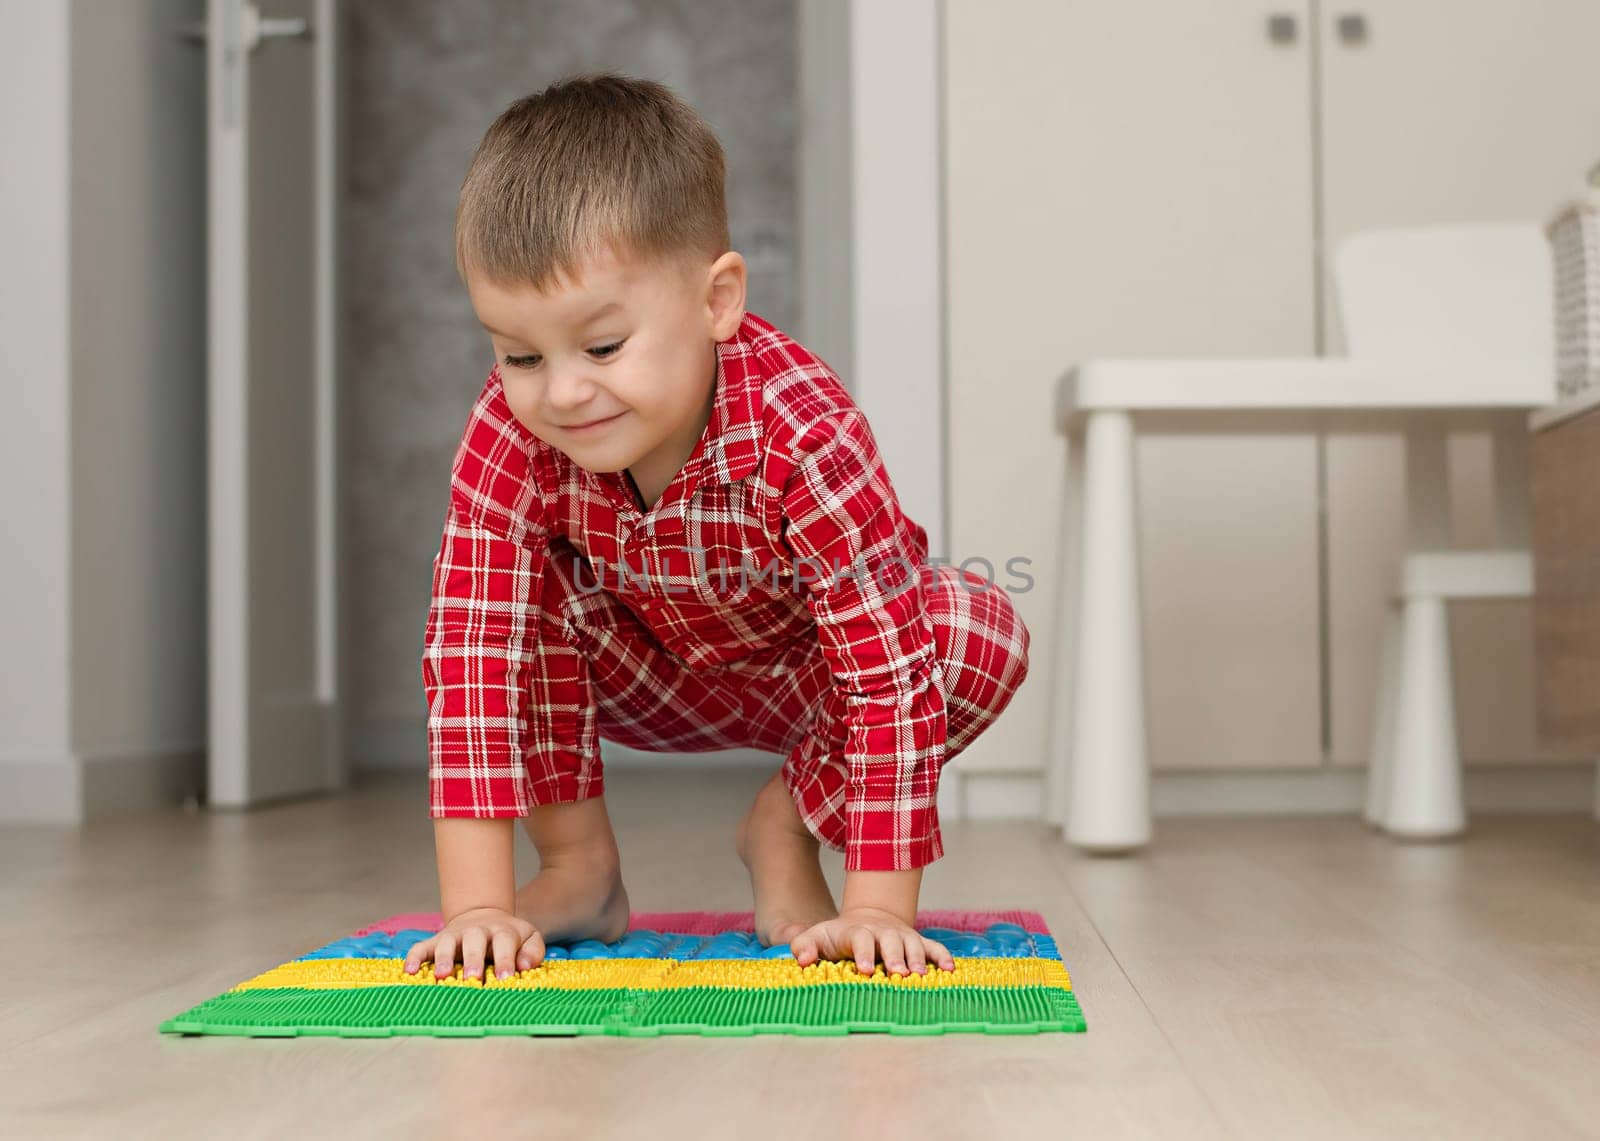 Sport and health concept. A little boy 4 years old in red checkered pajamas is working out on a multi-colored massage orthopedic mat with spikes in a home interior. Close-up. by ketlit